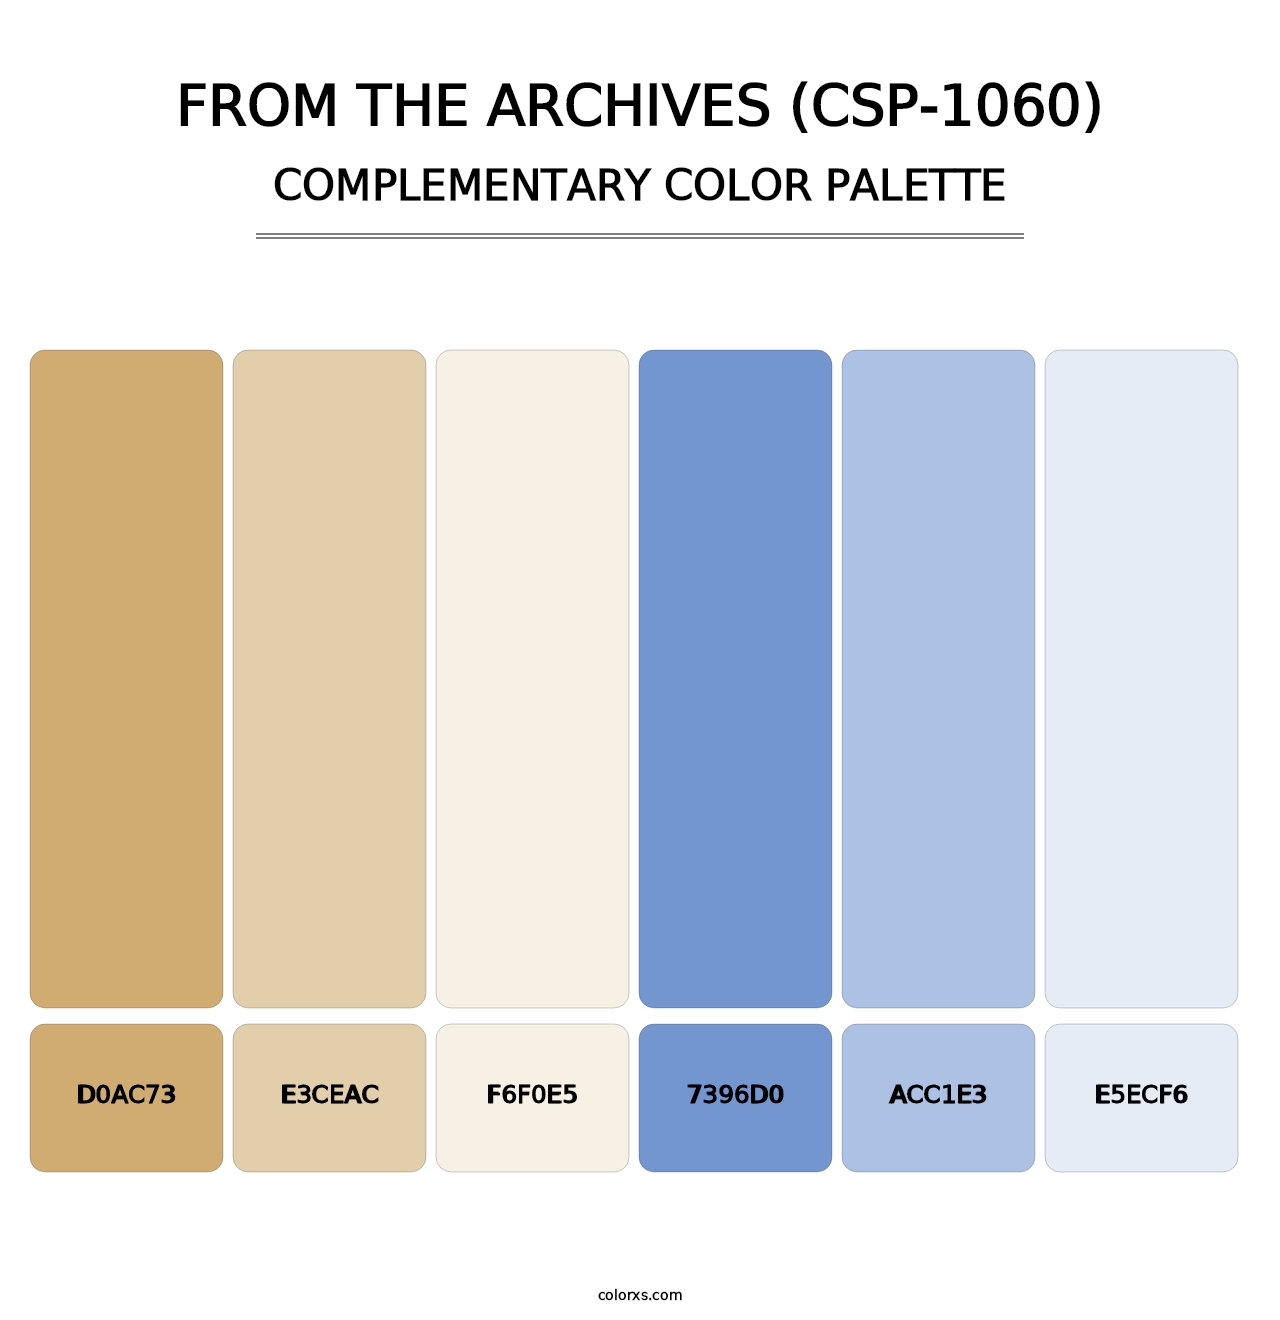 From the Archives (CSP-1060) - Complementary Color Palette